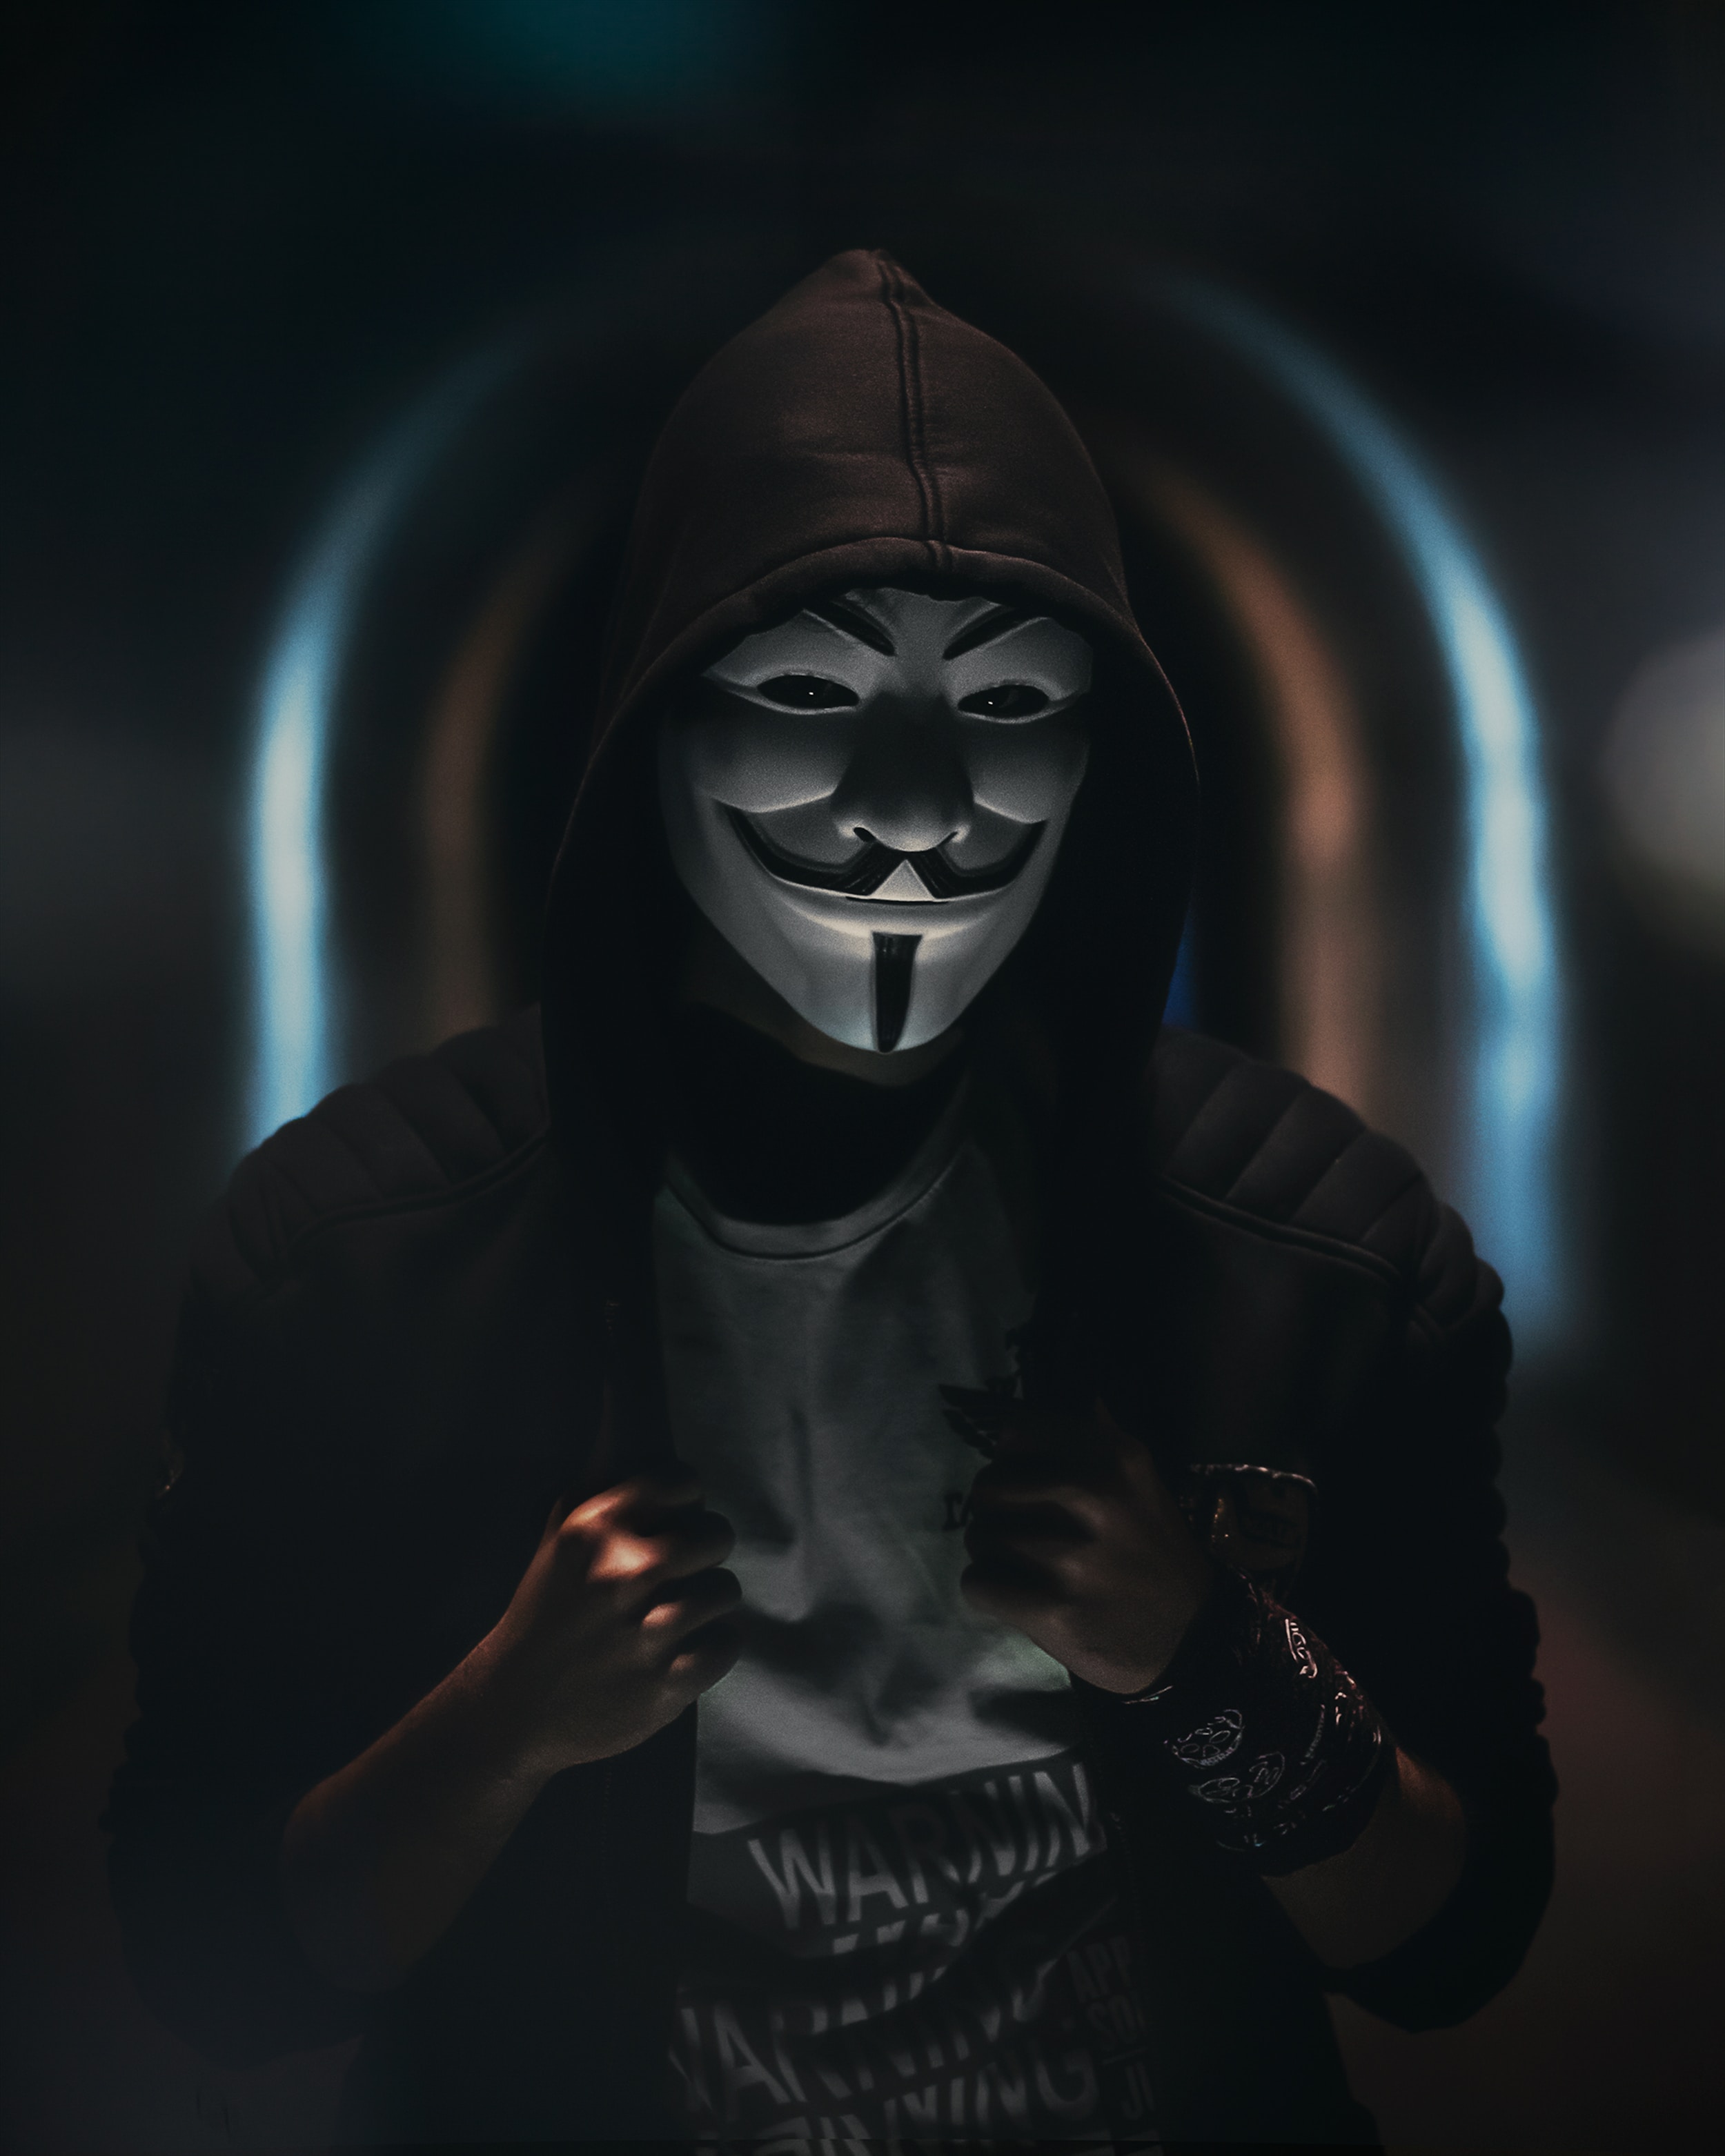 dark, anonymous, mask, hood, person, human, miscellanea, miscellaneous images